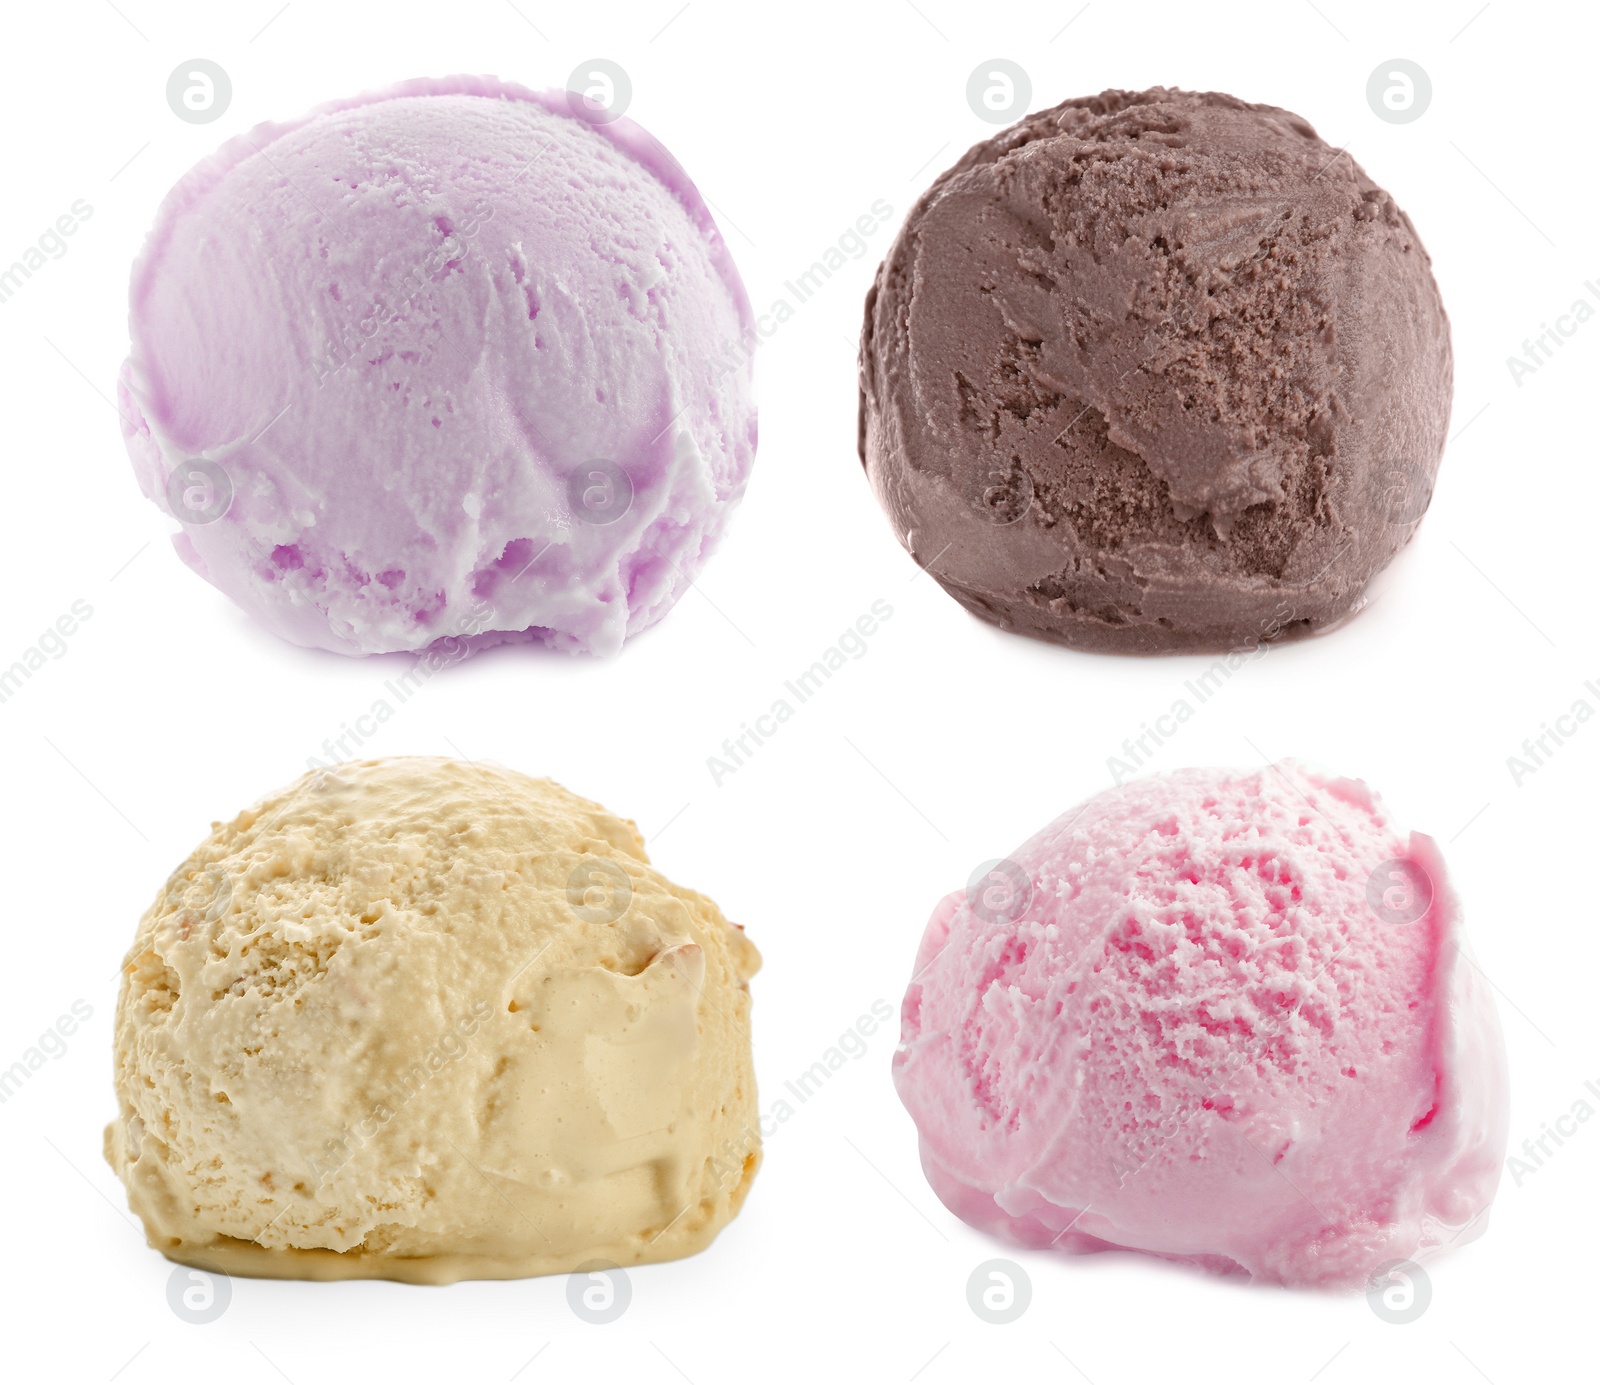 Image of Set of ice cream scoops of different colors and flavors isolated on white